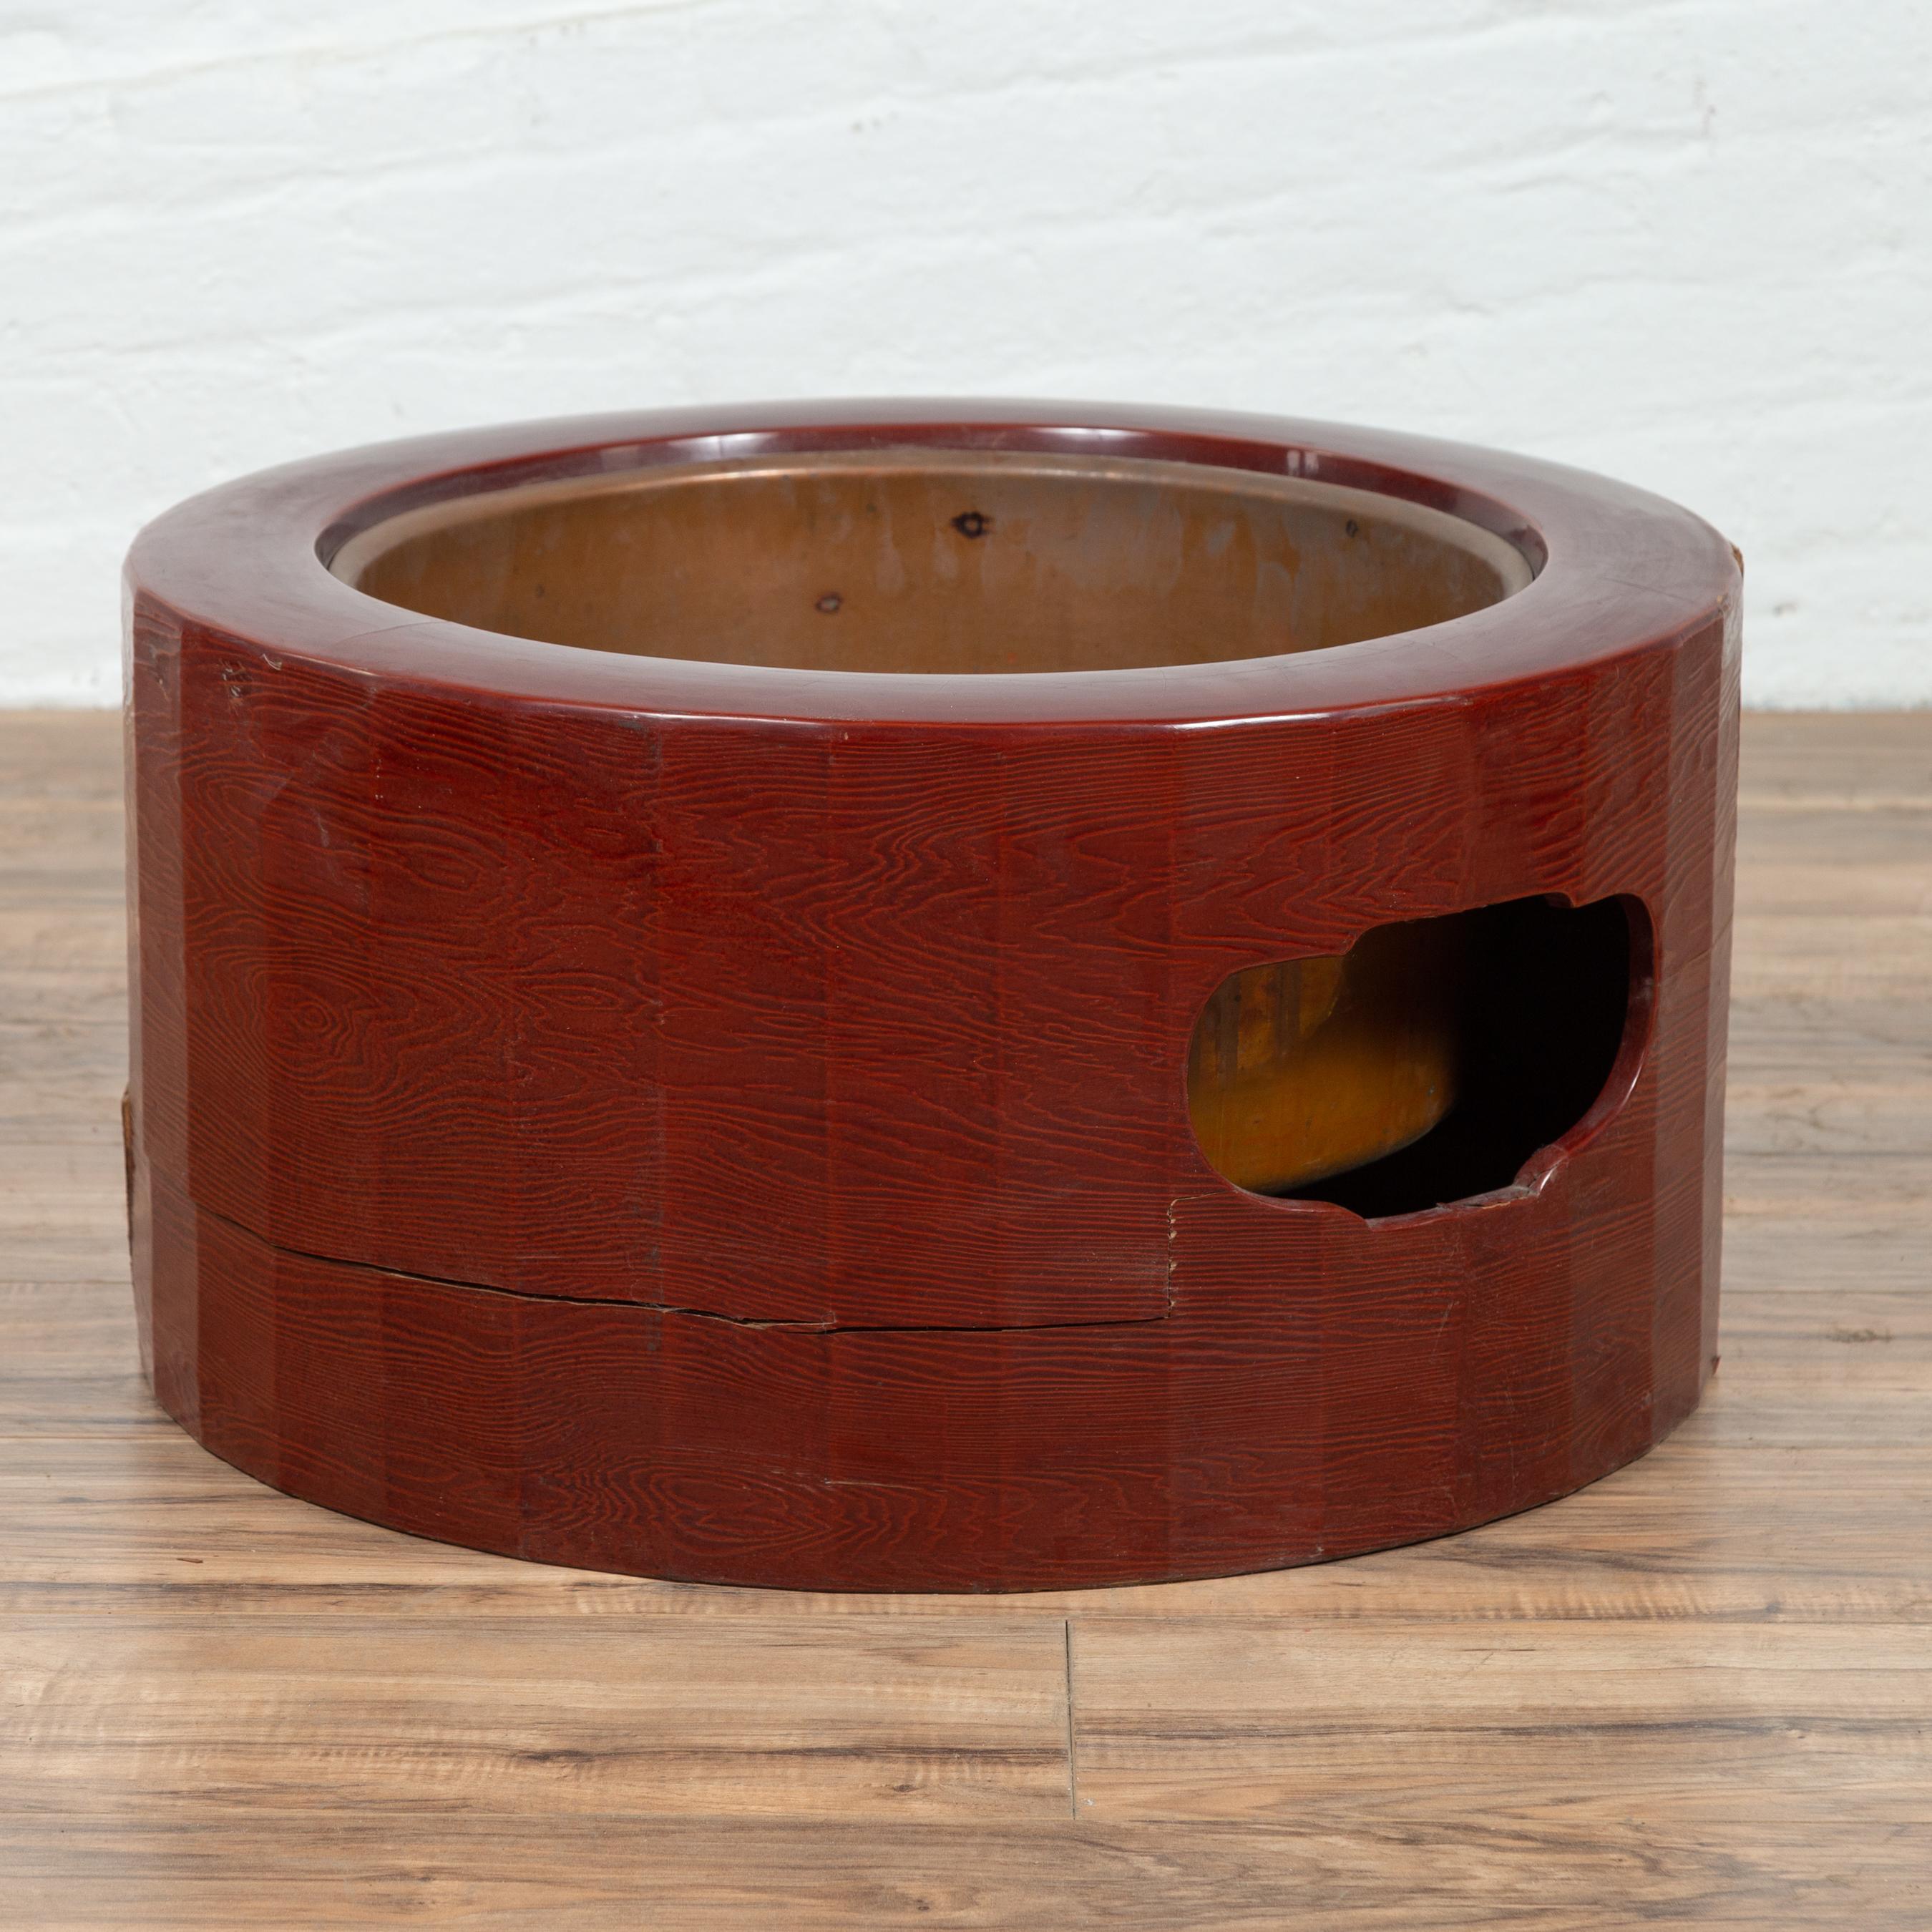 Taisho Japanese Taishō Period Early Red Lacquered Circular Hibachi, Early 20th Century For Sale